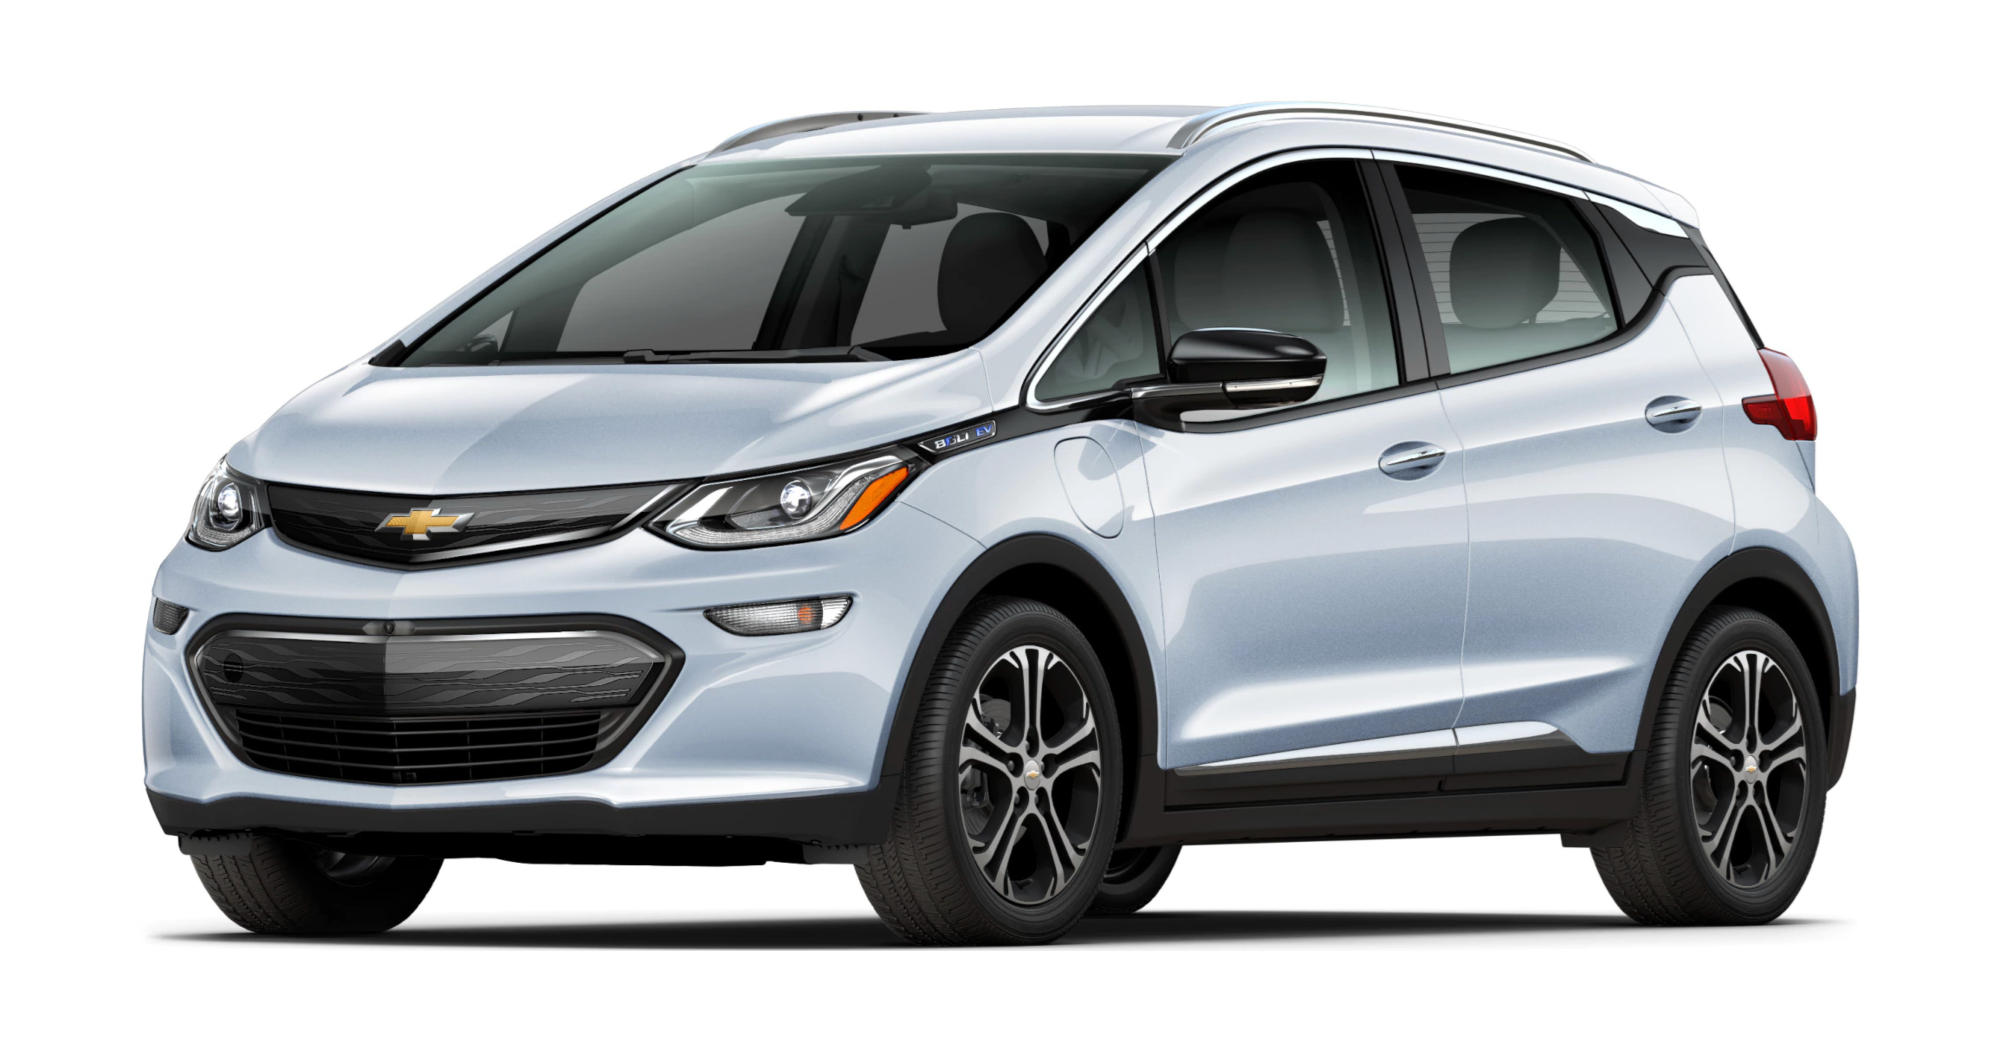 2018 Chevrolet Bolt EV LT Full Specs, Features and Price | CarBuzz